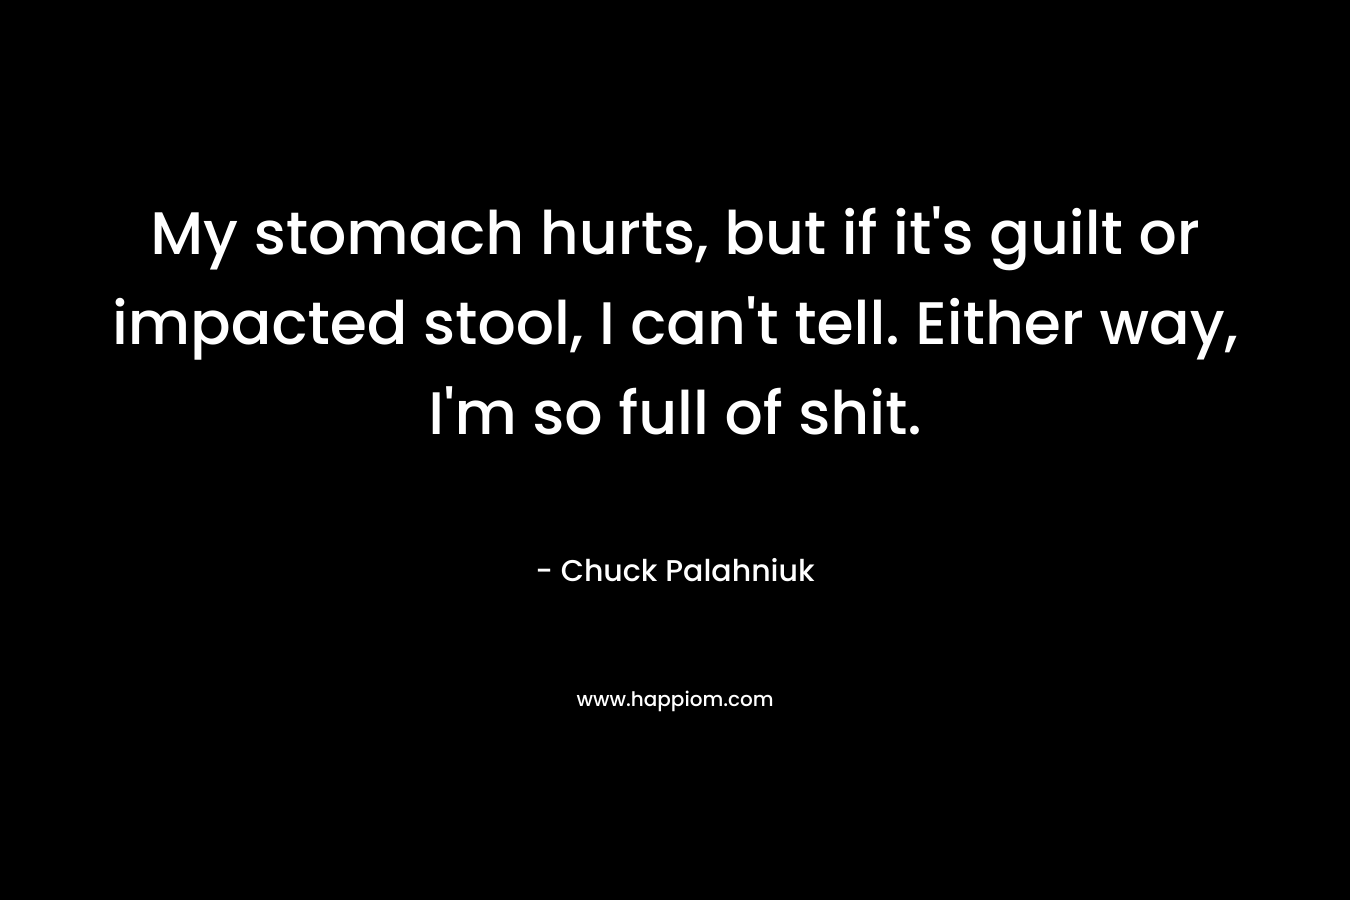 My stomach hurts, but if it’s guilt or impacted stool, I can’t tell. Either way, I’m so full of shit. – Chuck Palahniuk